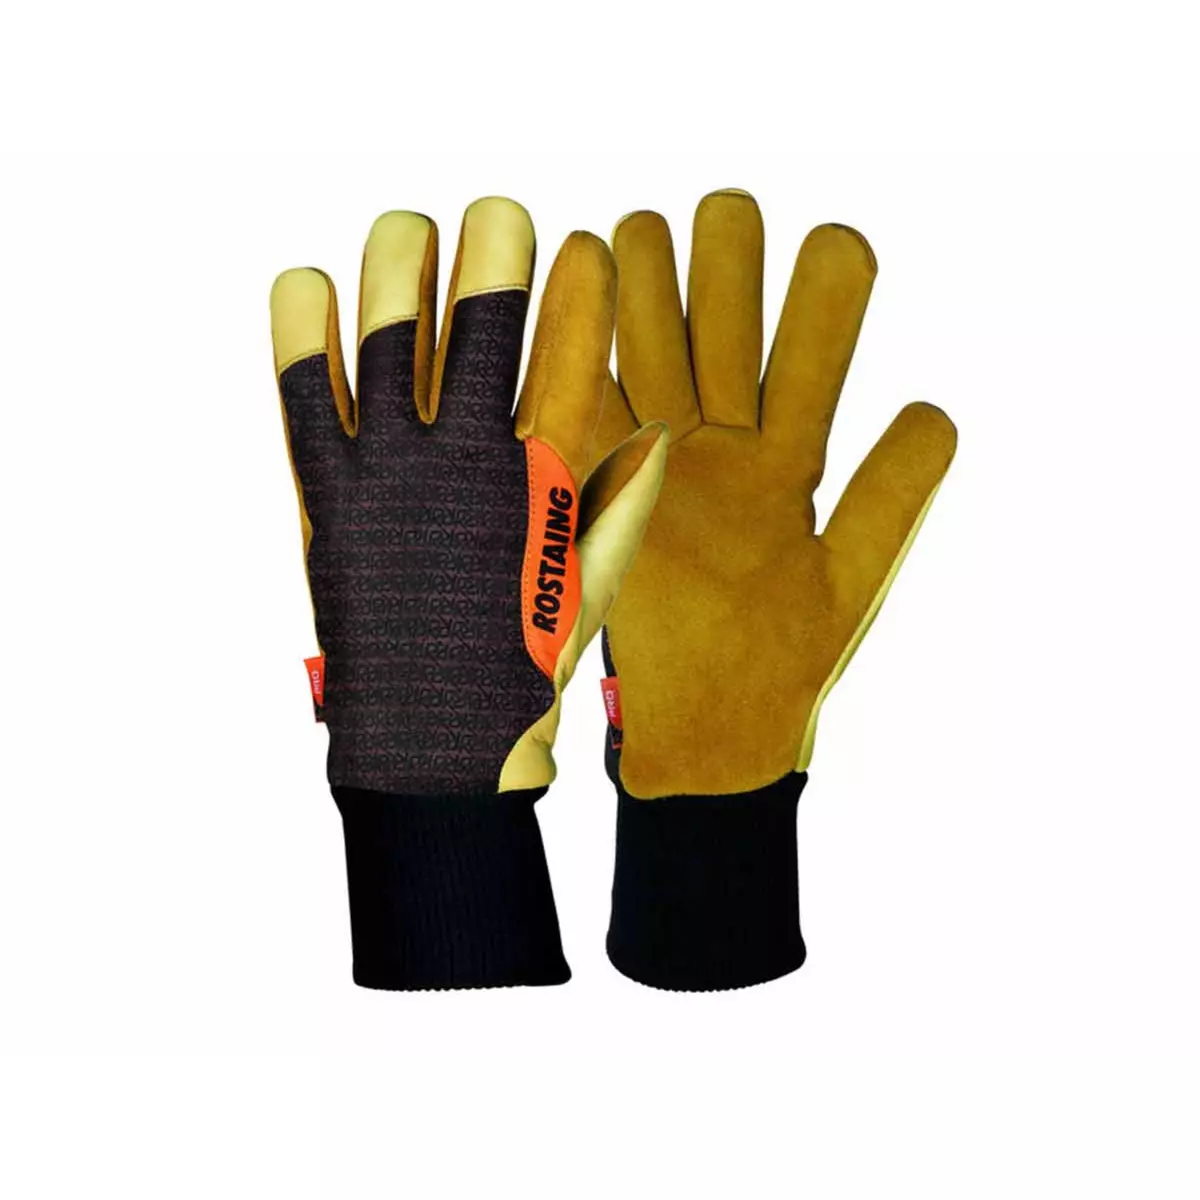 ROSTAING Gants de protection Pro Hiver - Taille 11 - Rostaing